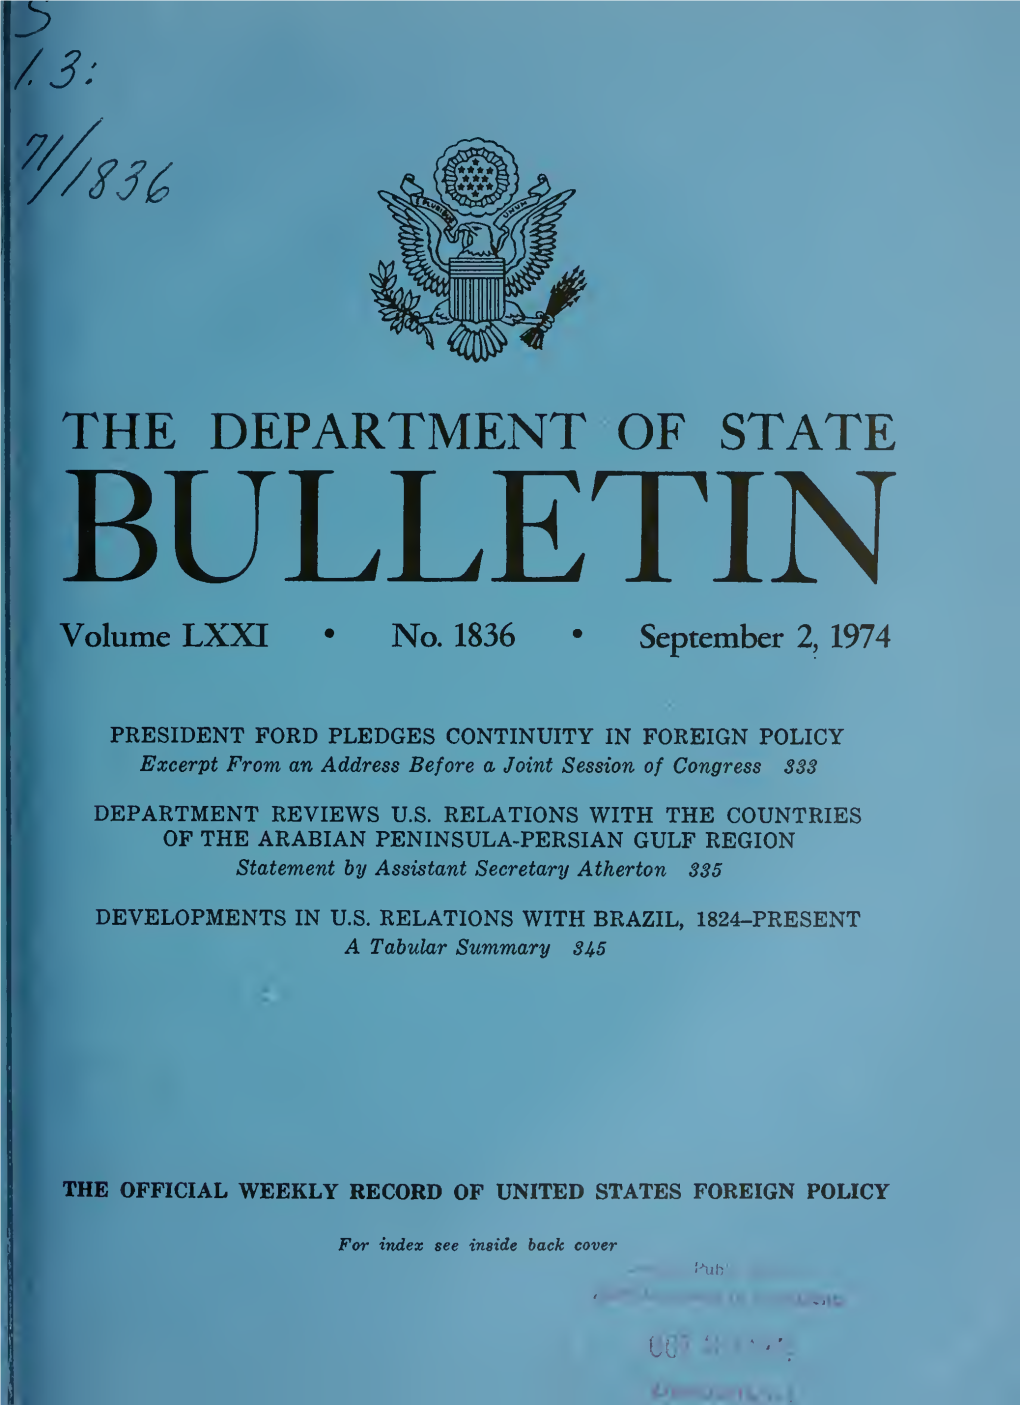 Department of State Bulletin